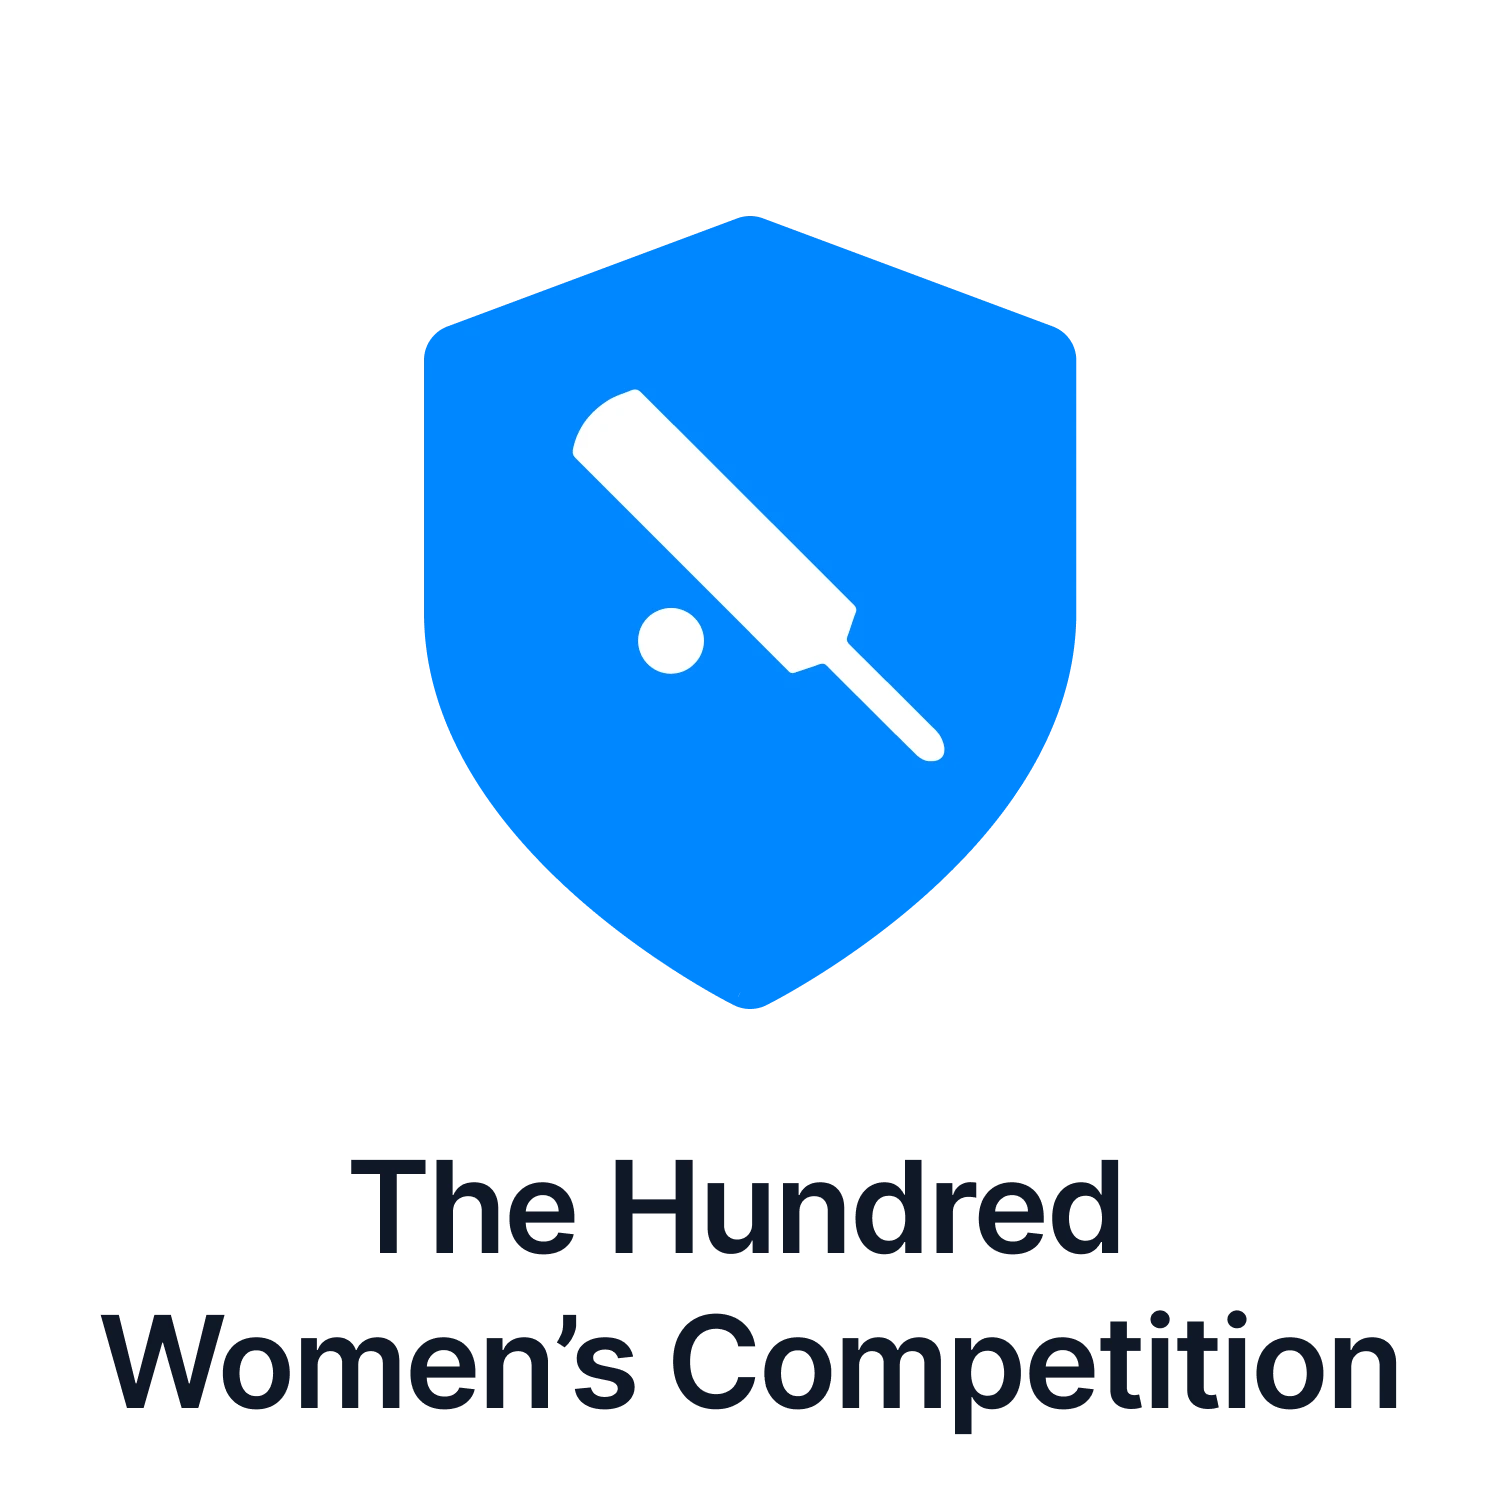 Check out our predictions on The Hundred Women's Competition matches.